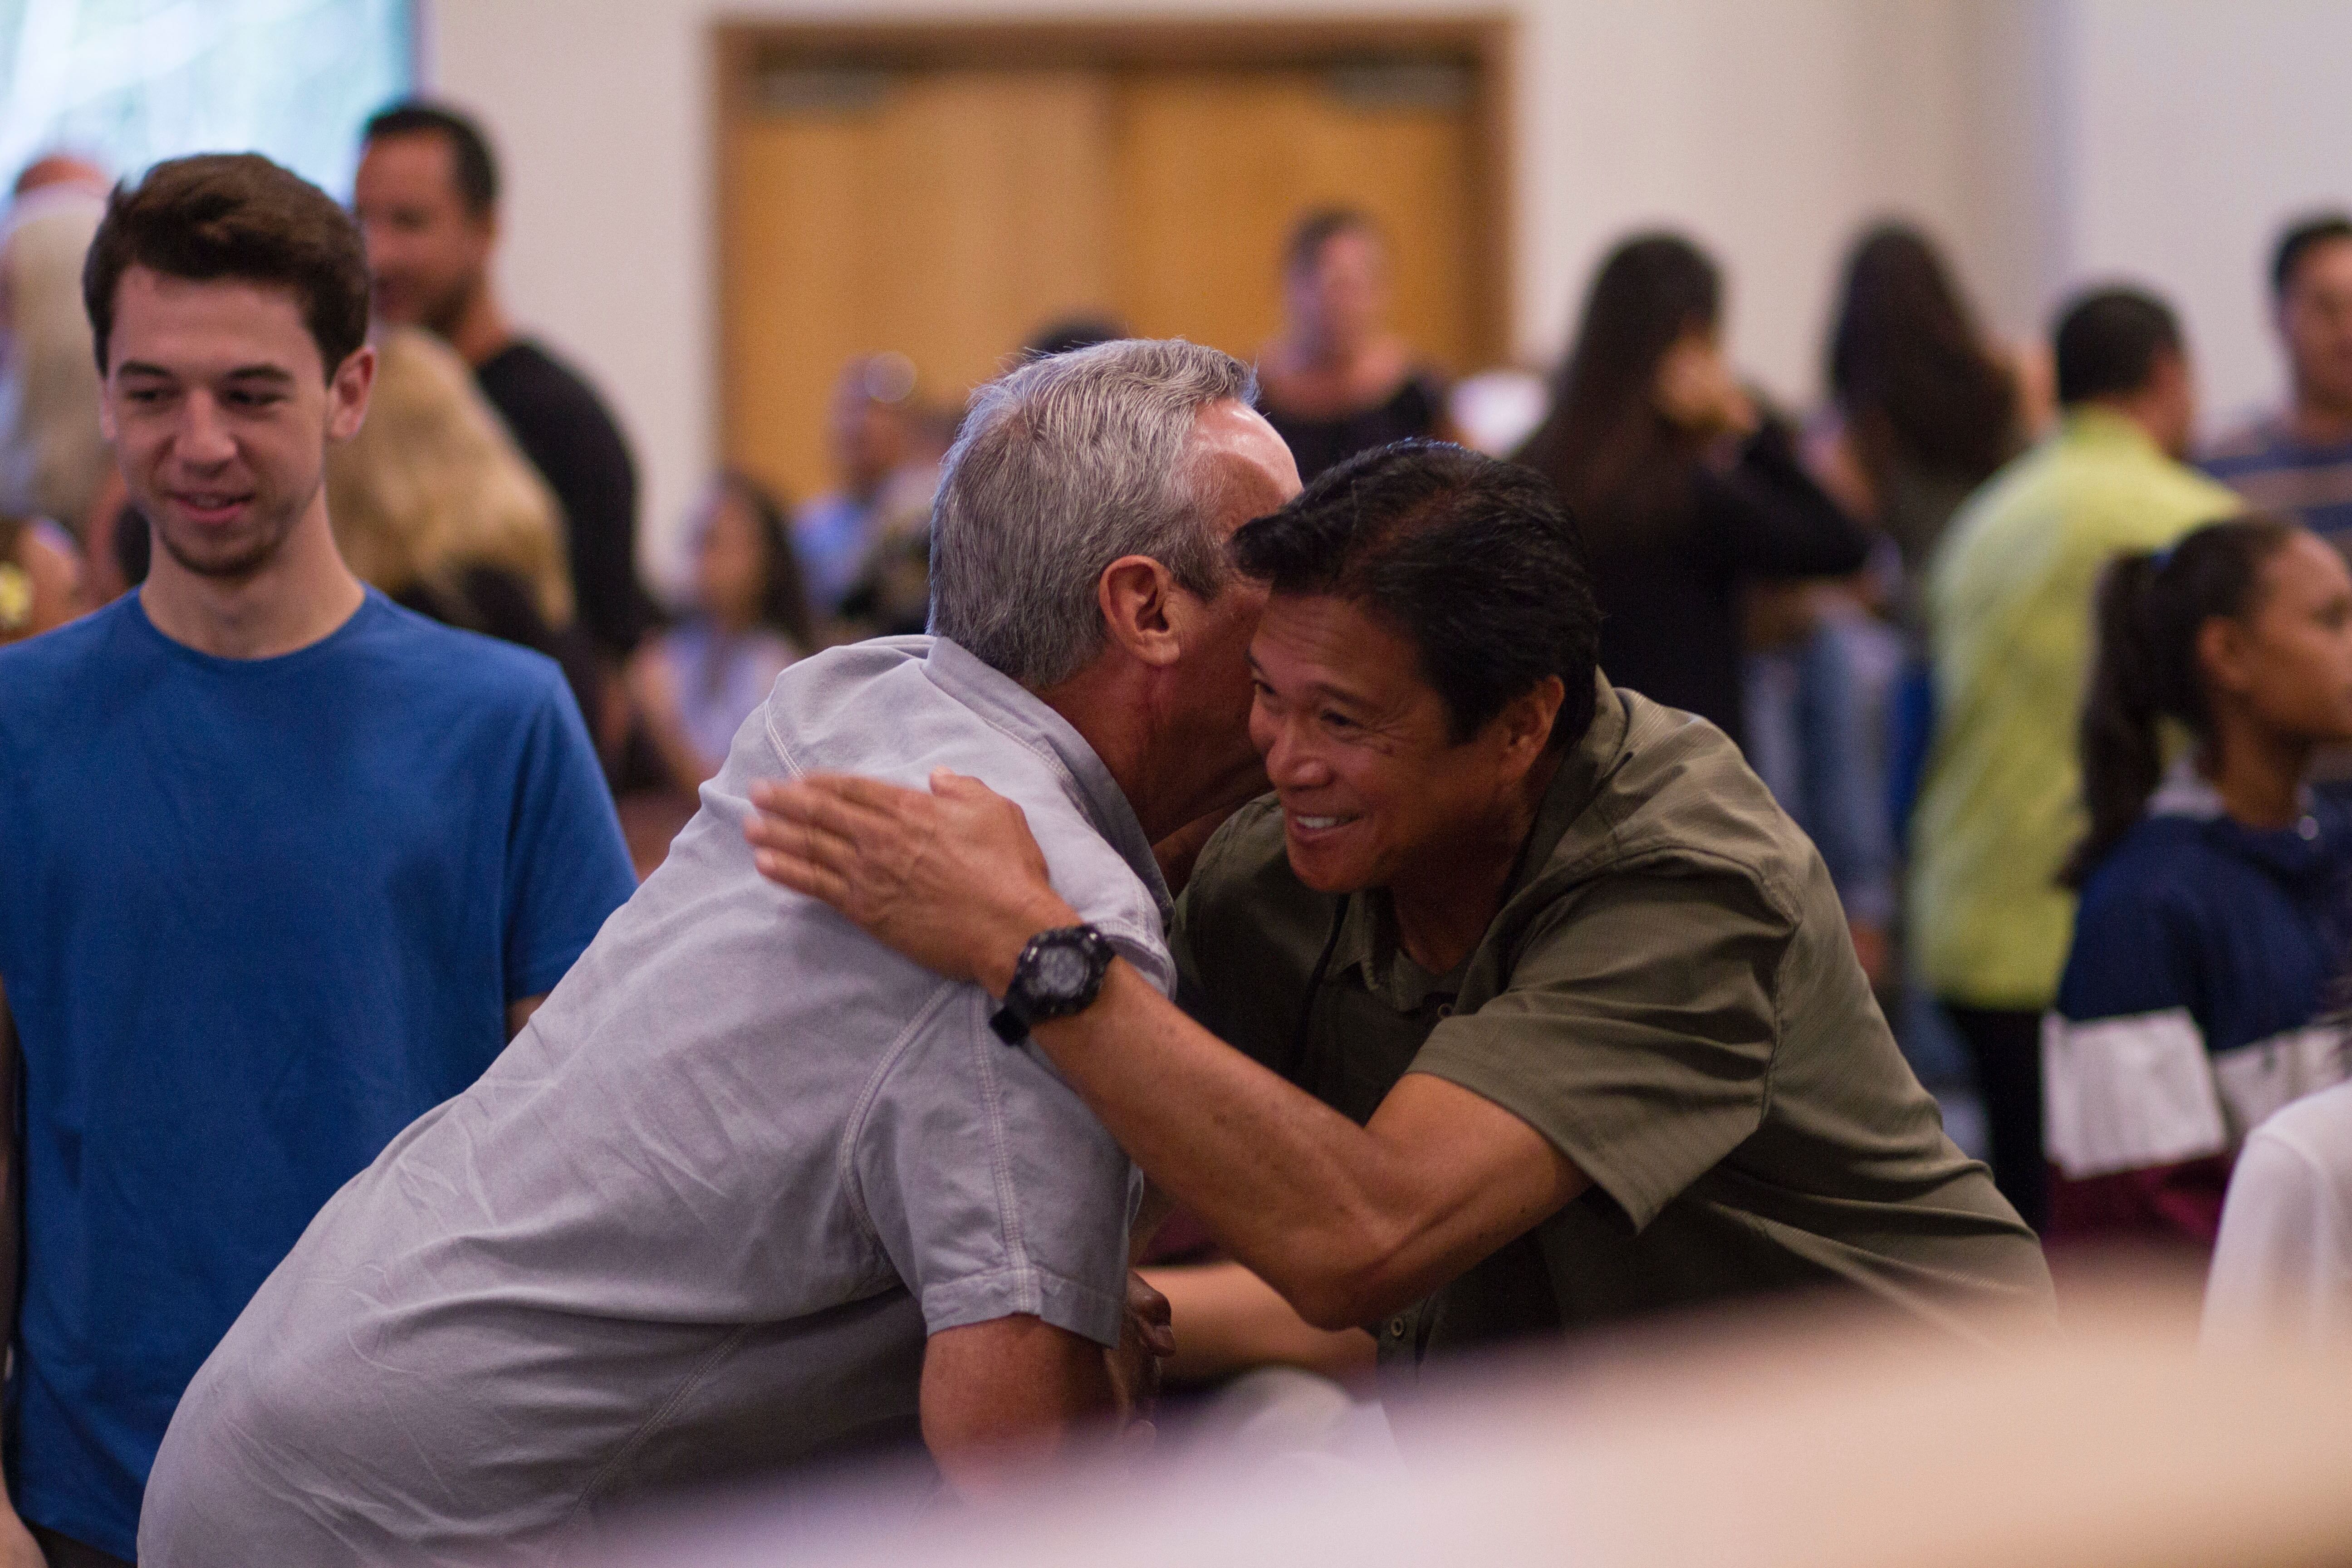 Two people at a conference embracing, one is an older man with white hair, the other is a younger asian man